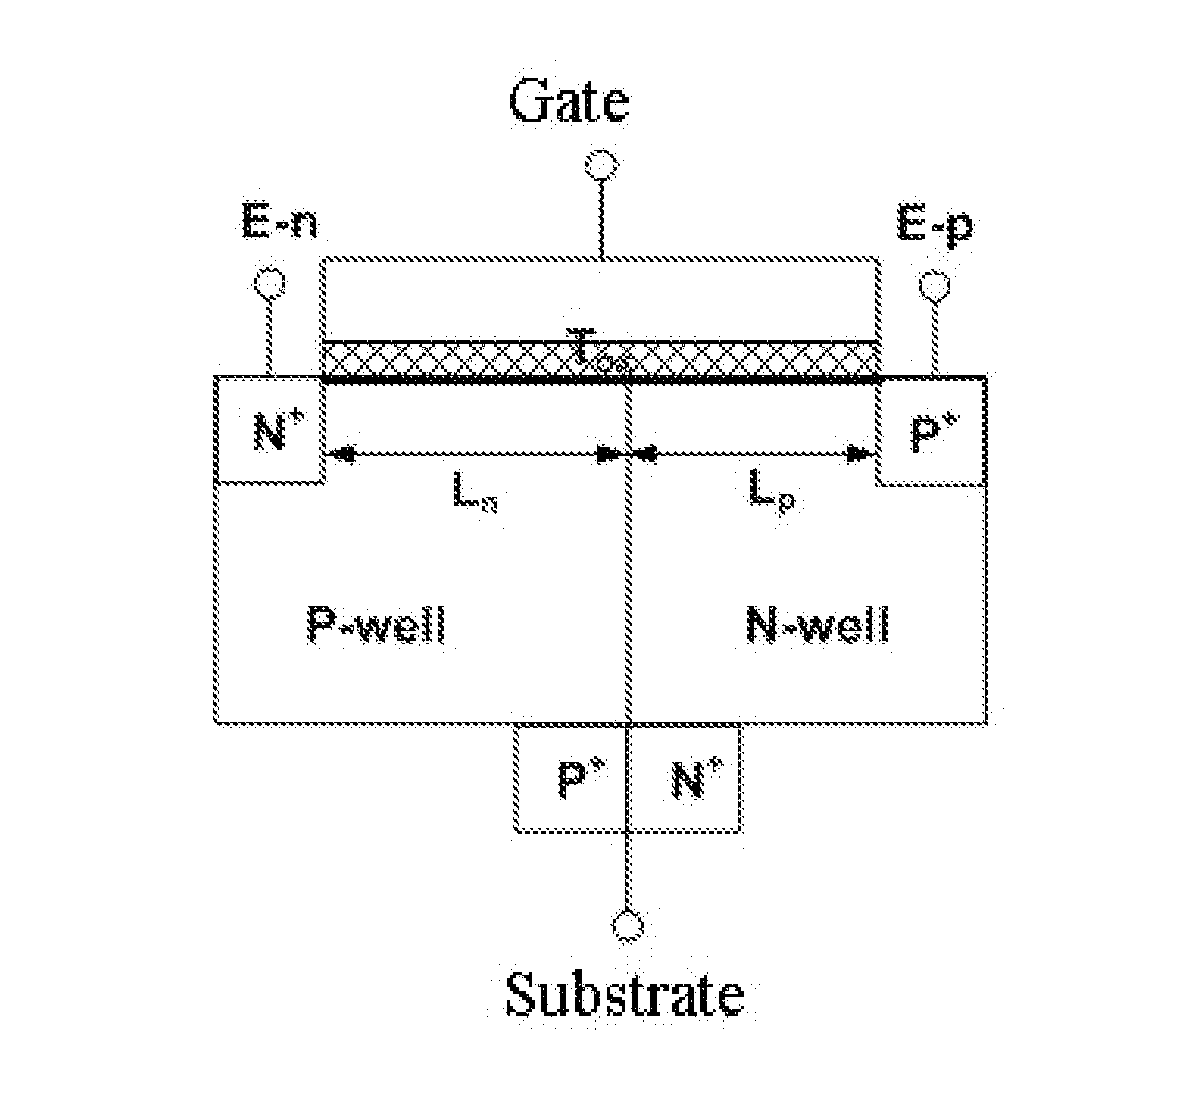 Testing structure and method for interface trap density of gate oxide